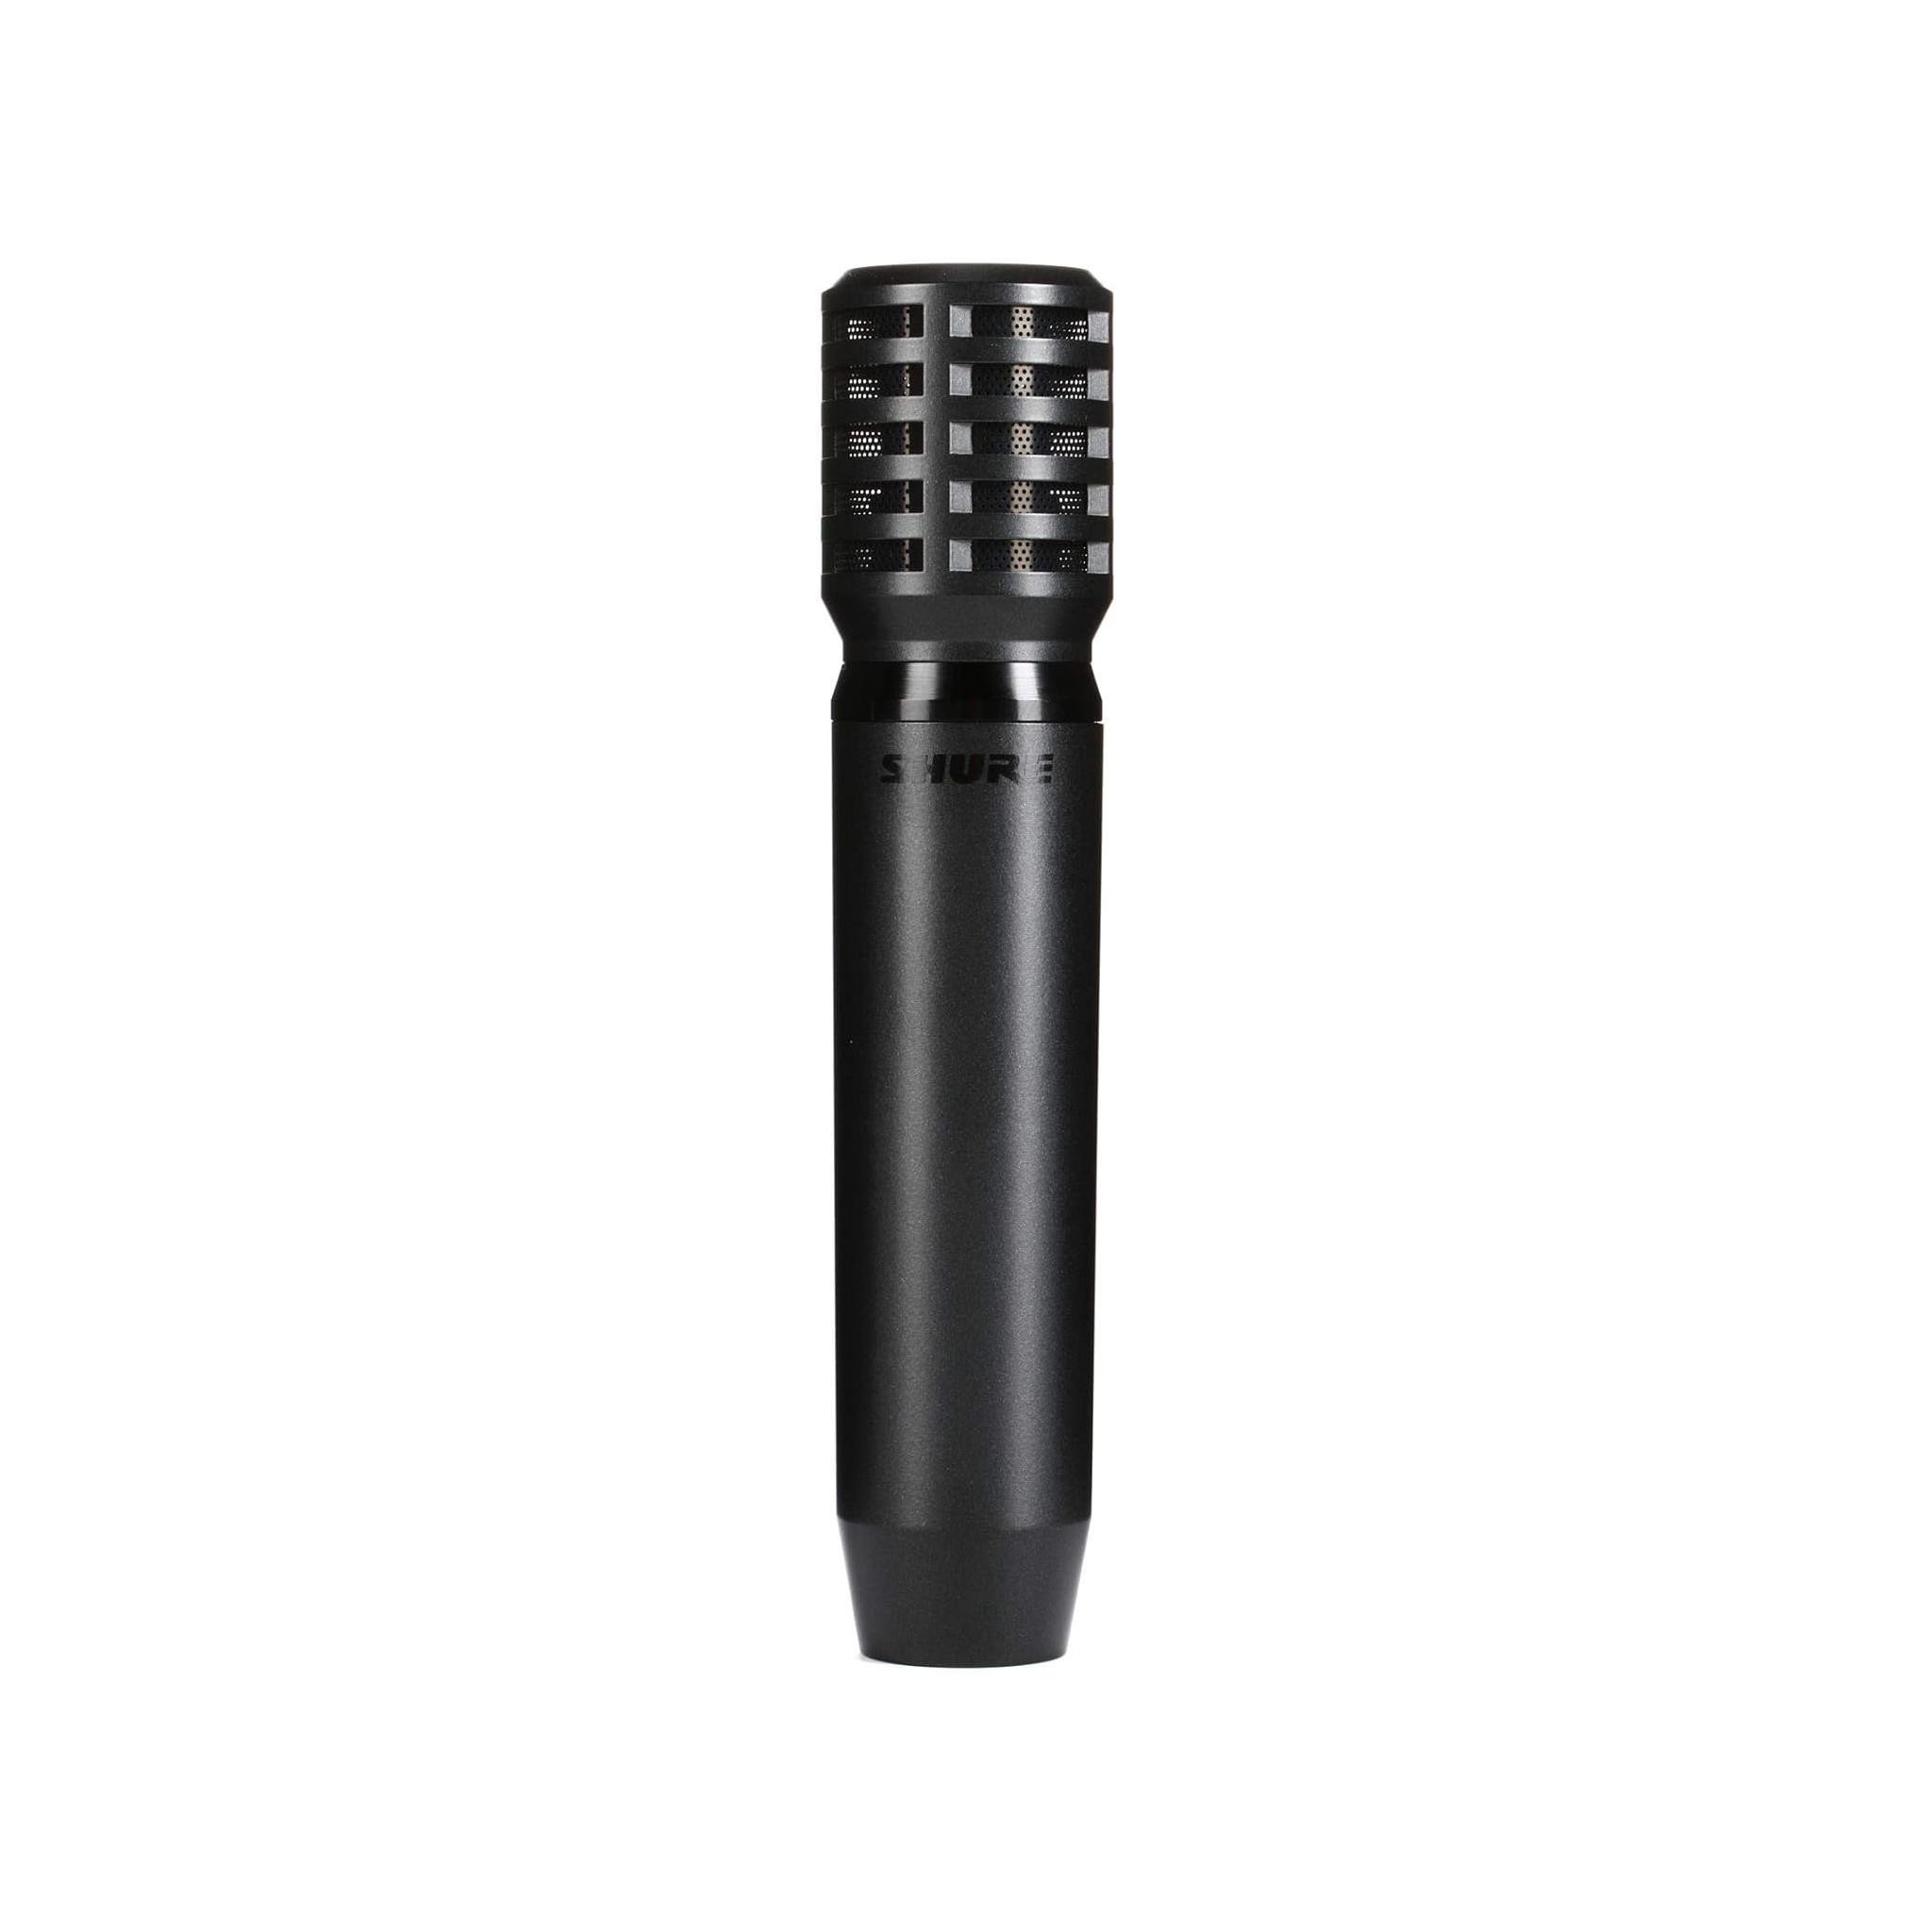 Shure Cardioid dynamic instrument microphone - without cable